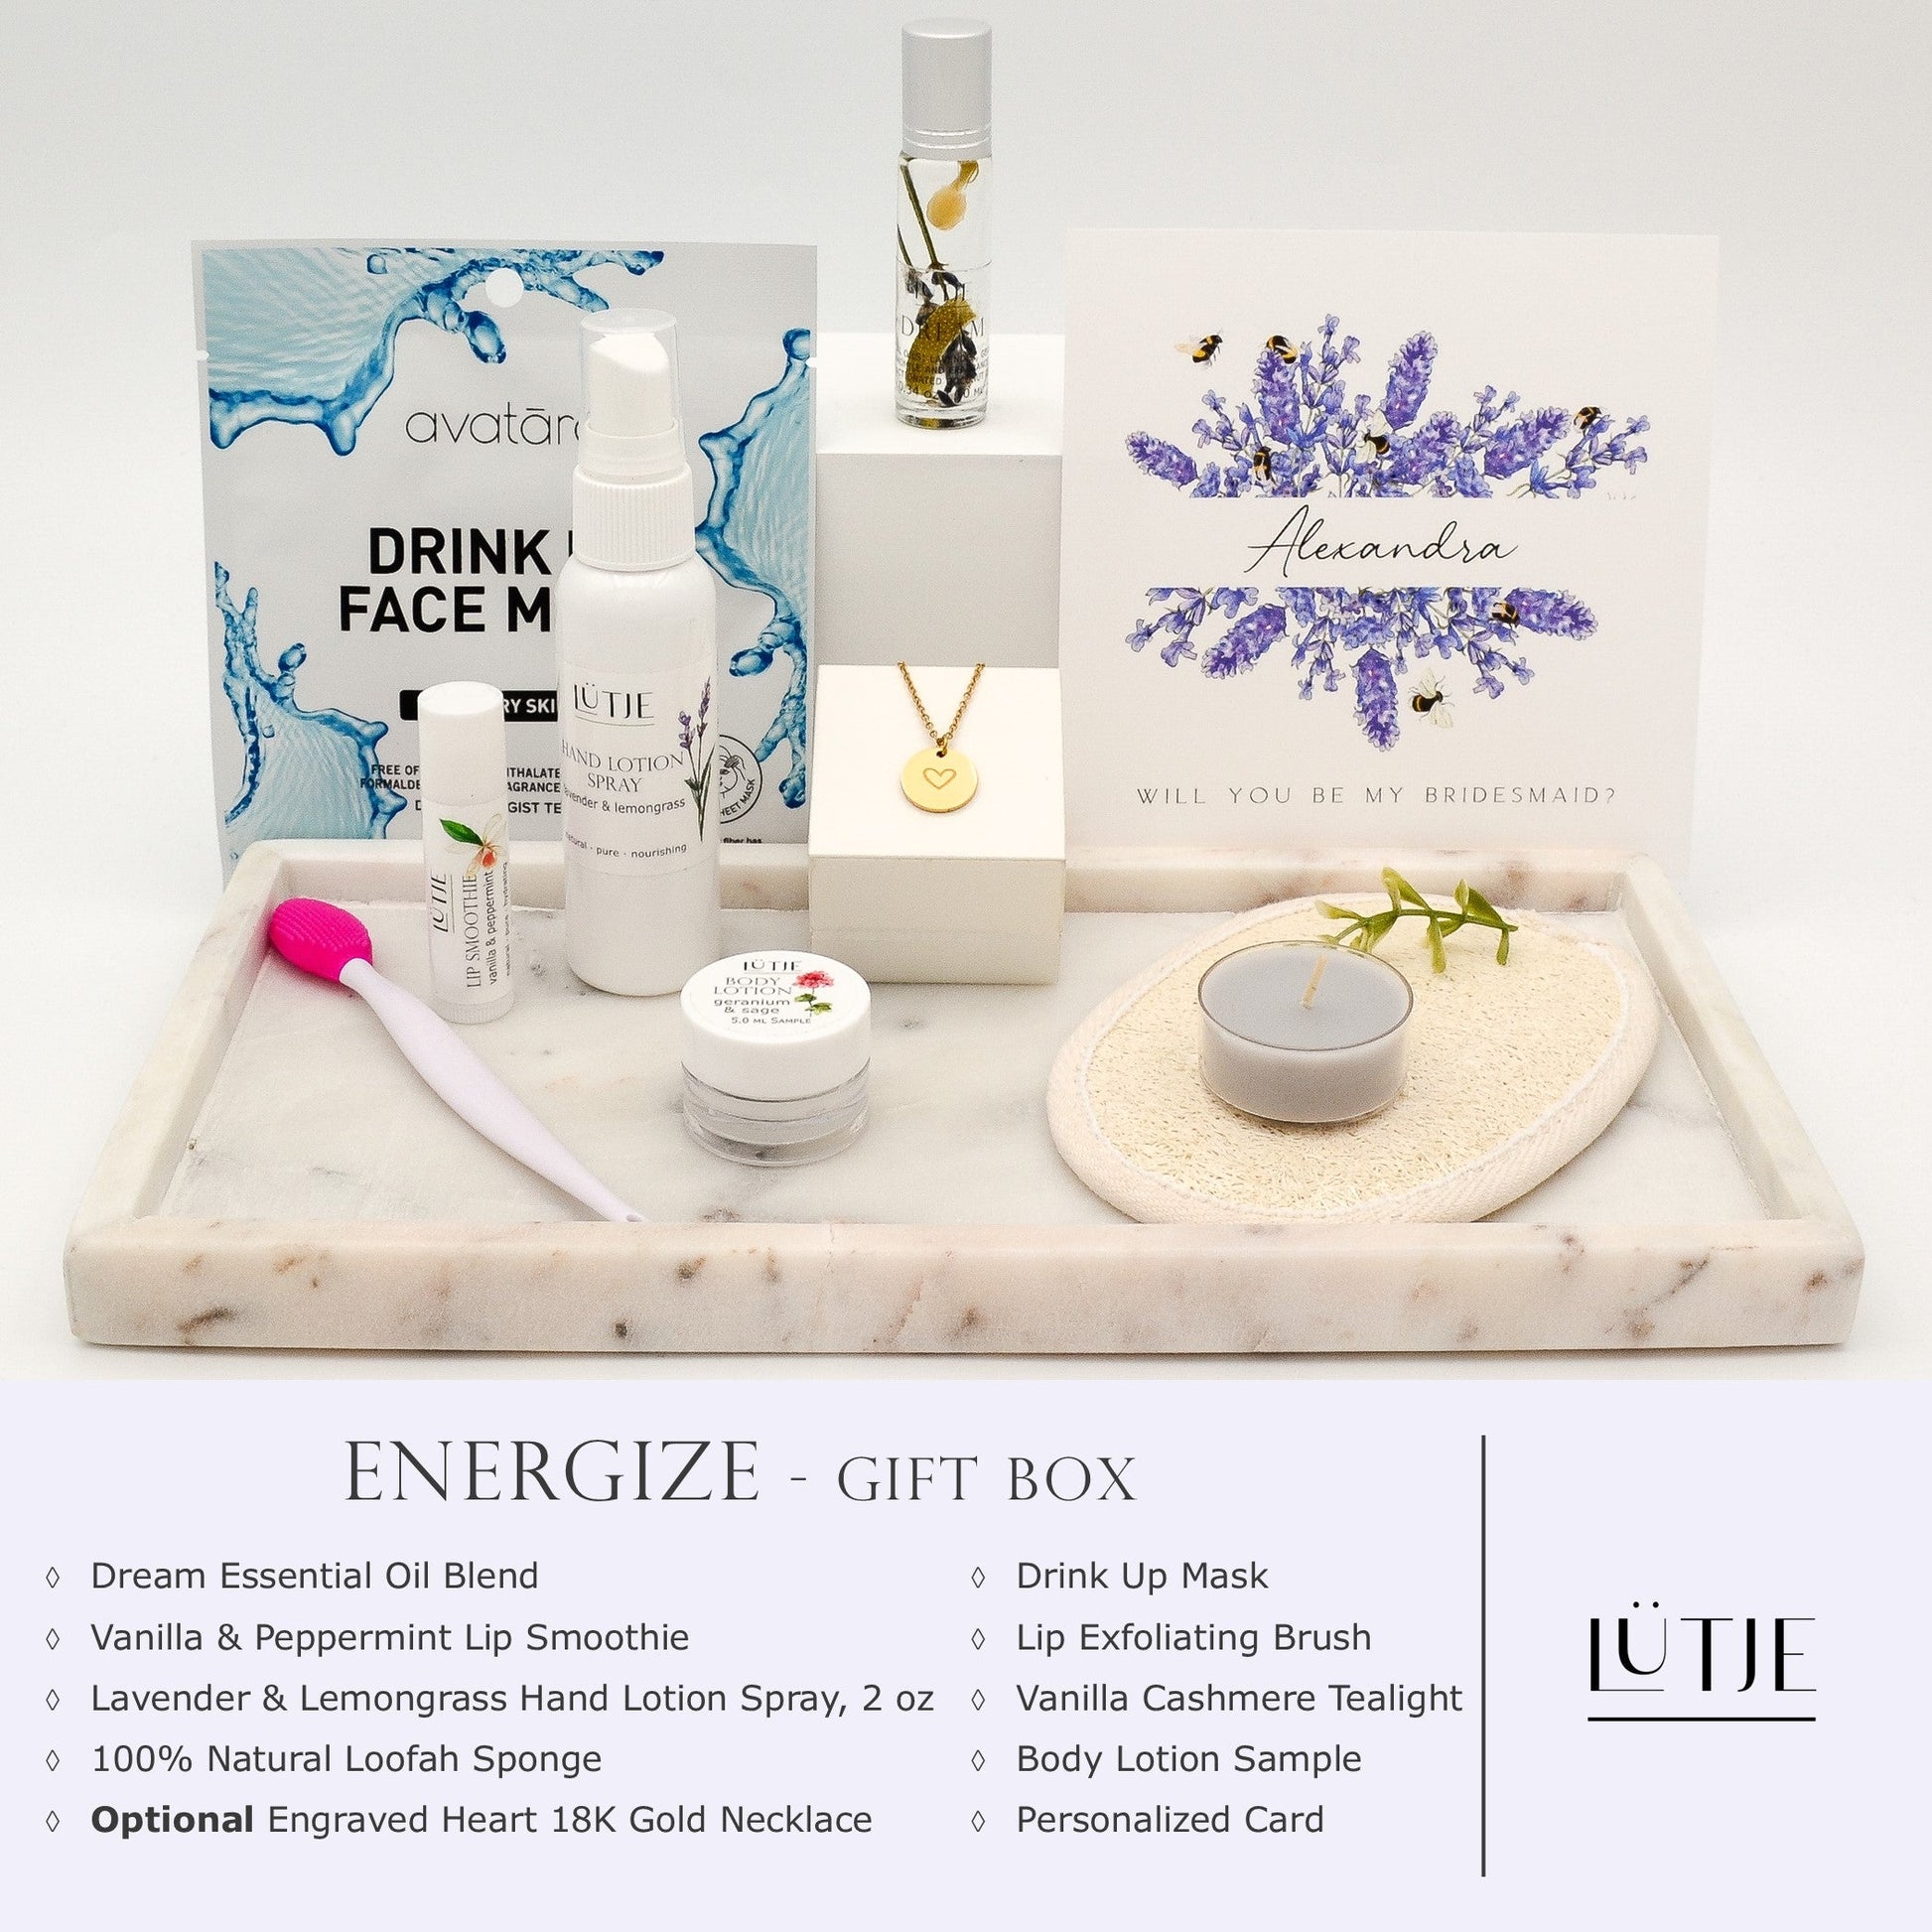 Energize Gift Box for women, BFF, wife, daughter, sister, mom, or grandma, includes Lavender & Lemongrass hand lotion spray, essential oil, lip balm, hydrating face mask, other bath, spa and self-care items, and optional 18K gold-plated necklace with engraved heart.